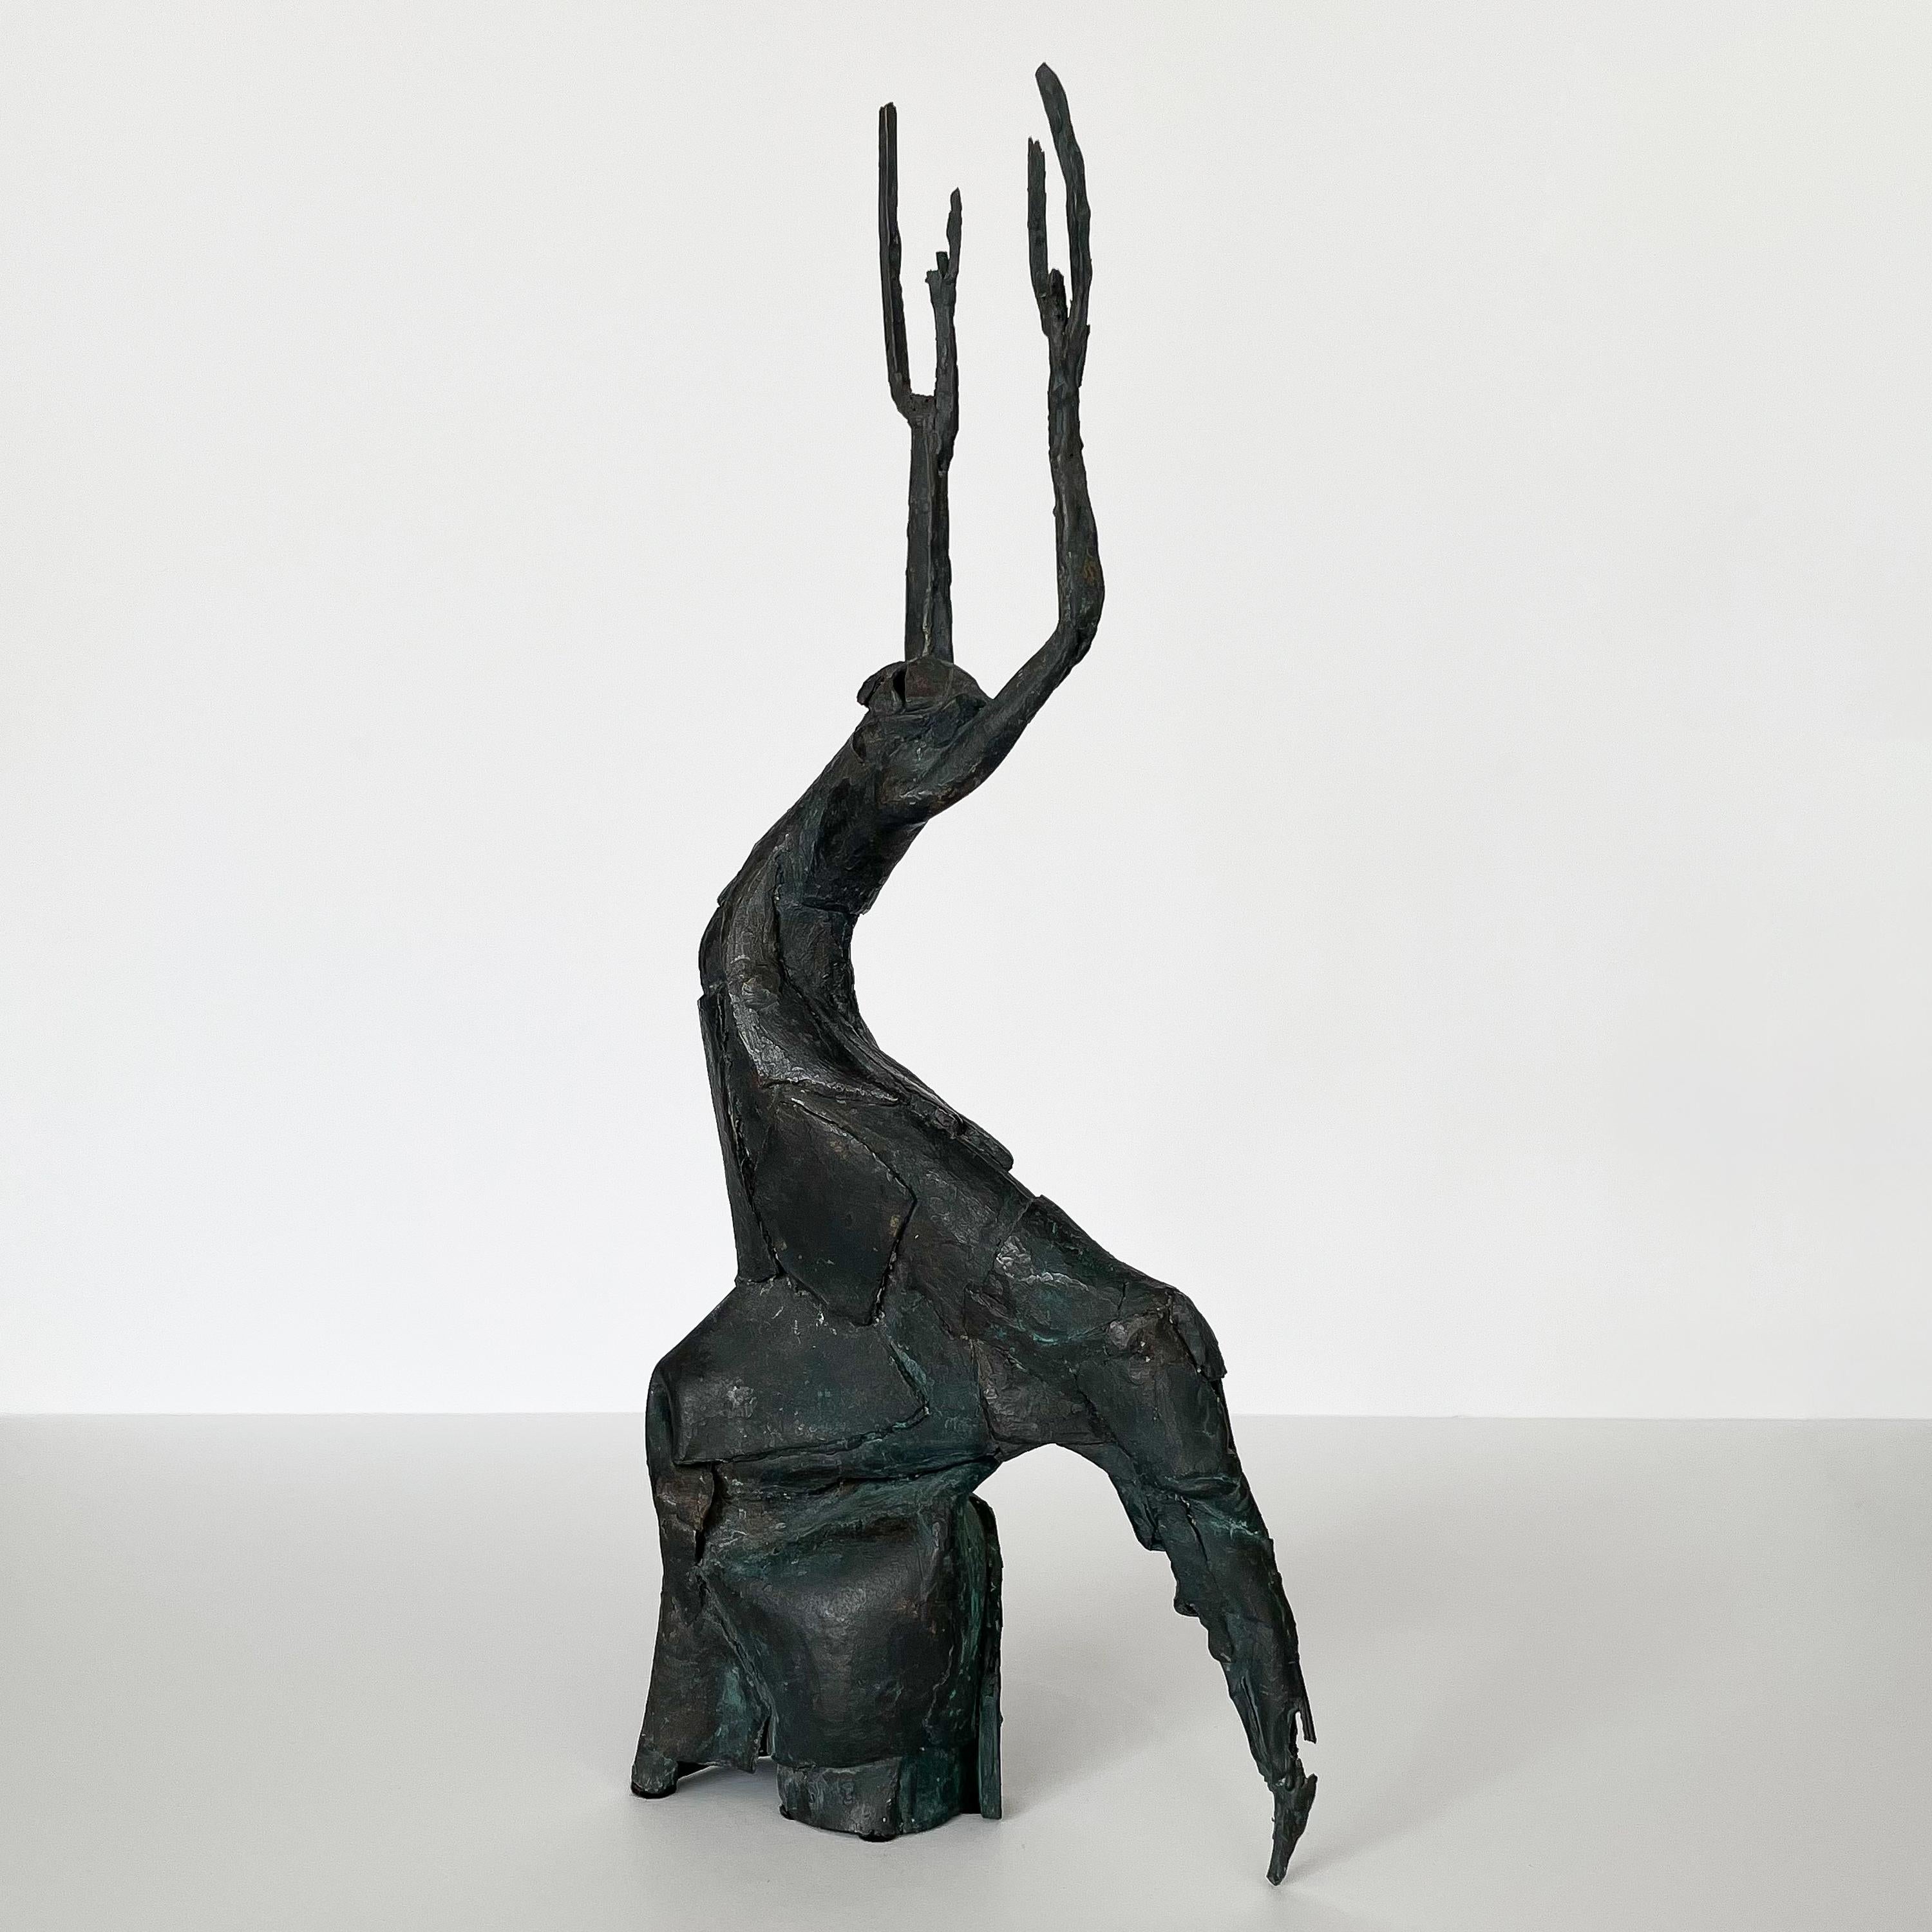 A unique mid century solid bronze figurative abstract sculpture, signed. This patinated bronze sculpture is anthropomorphic in design with an unusual mix of an animal, human and tree. The arms of the figure reach upwards and extend into branches or